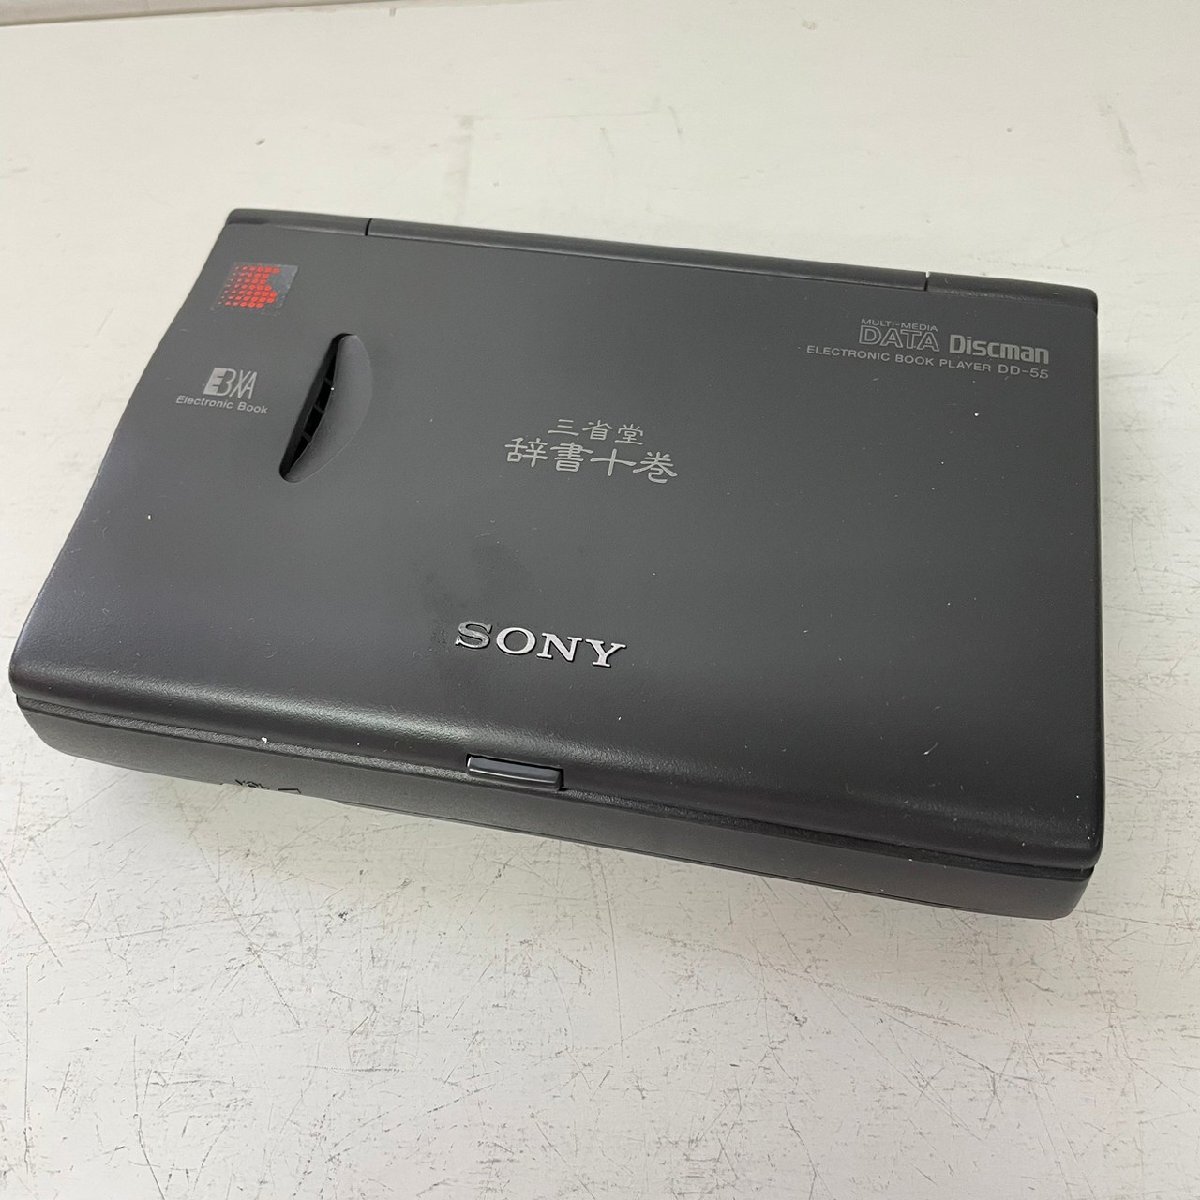  Sony electron book player DD-55 three .. dictionary 10 volume no inspection 3893